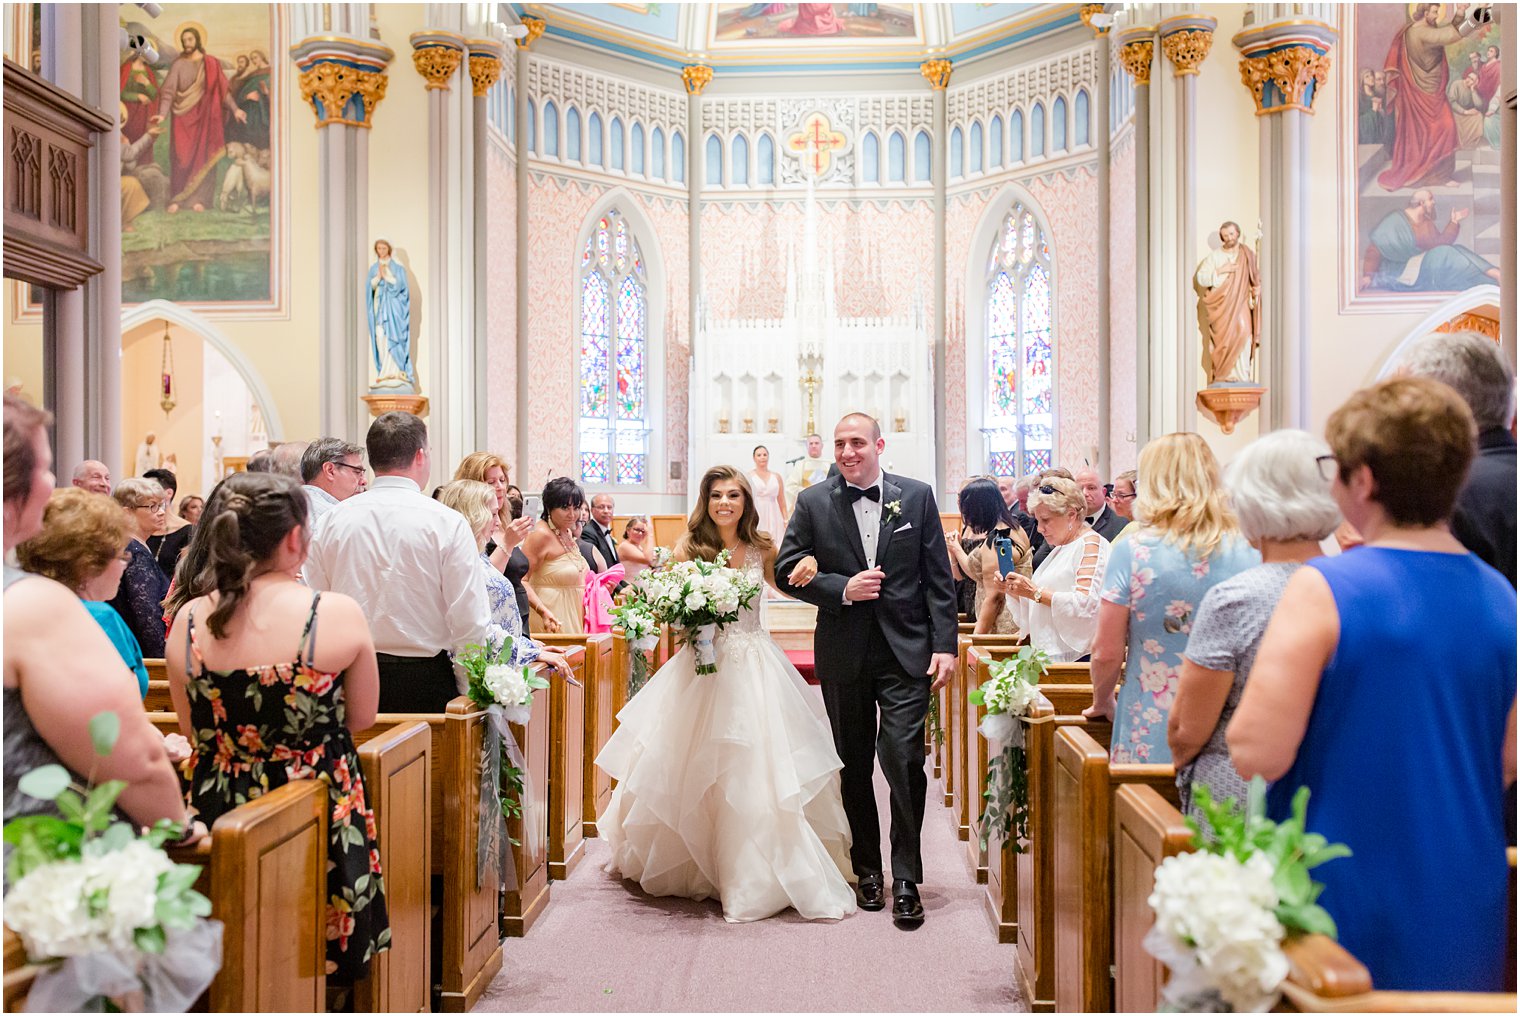 Wedding recessional at St. Peter the Apostle in New Brunswick NJ